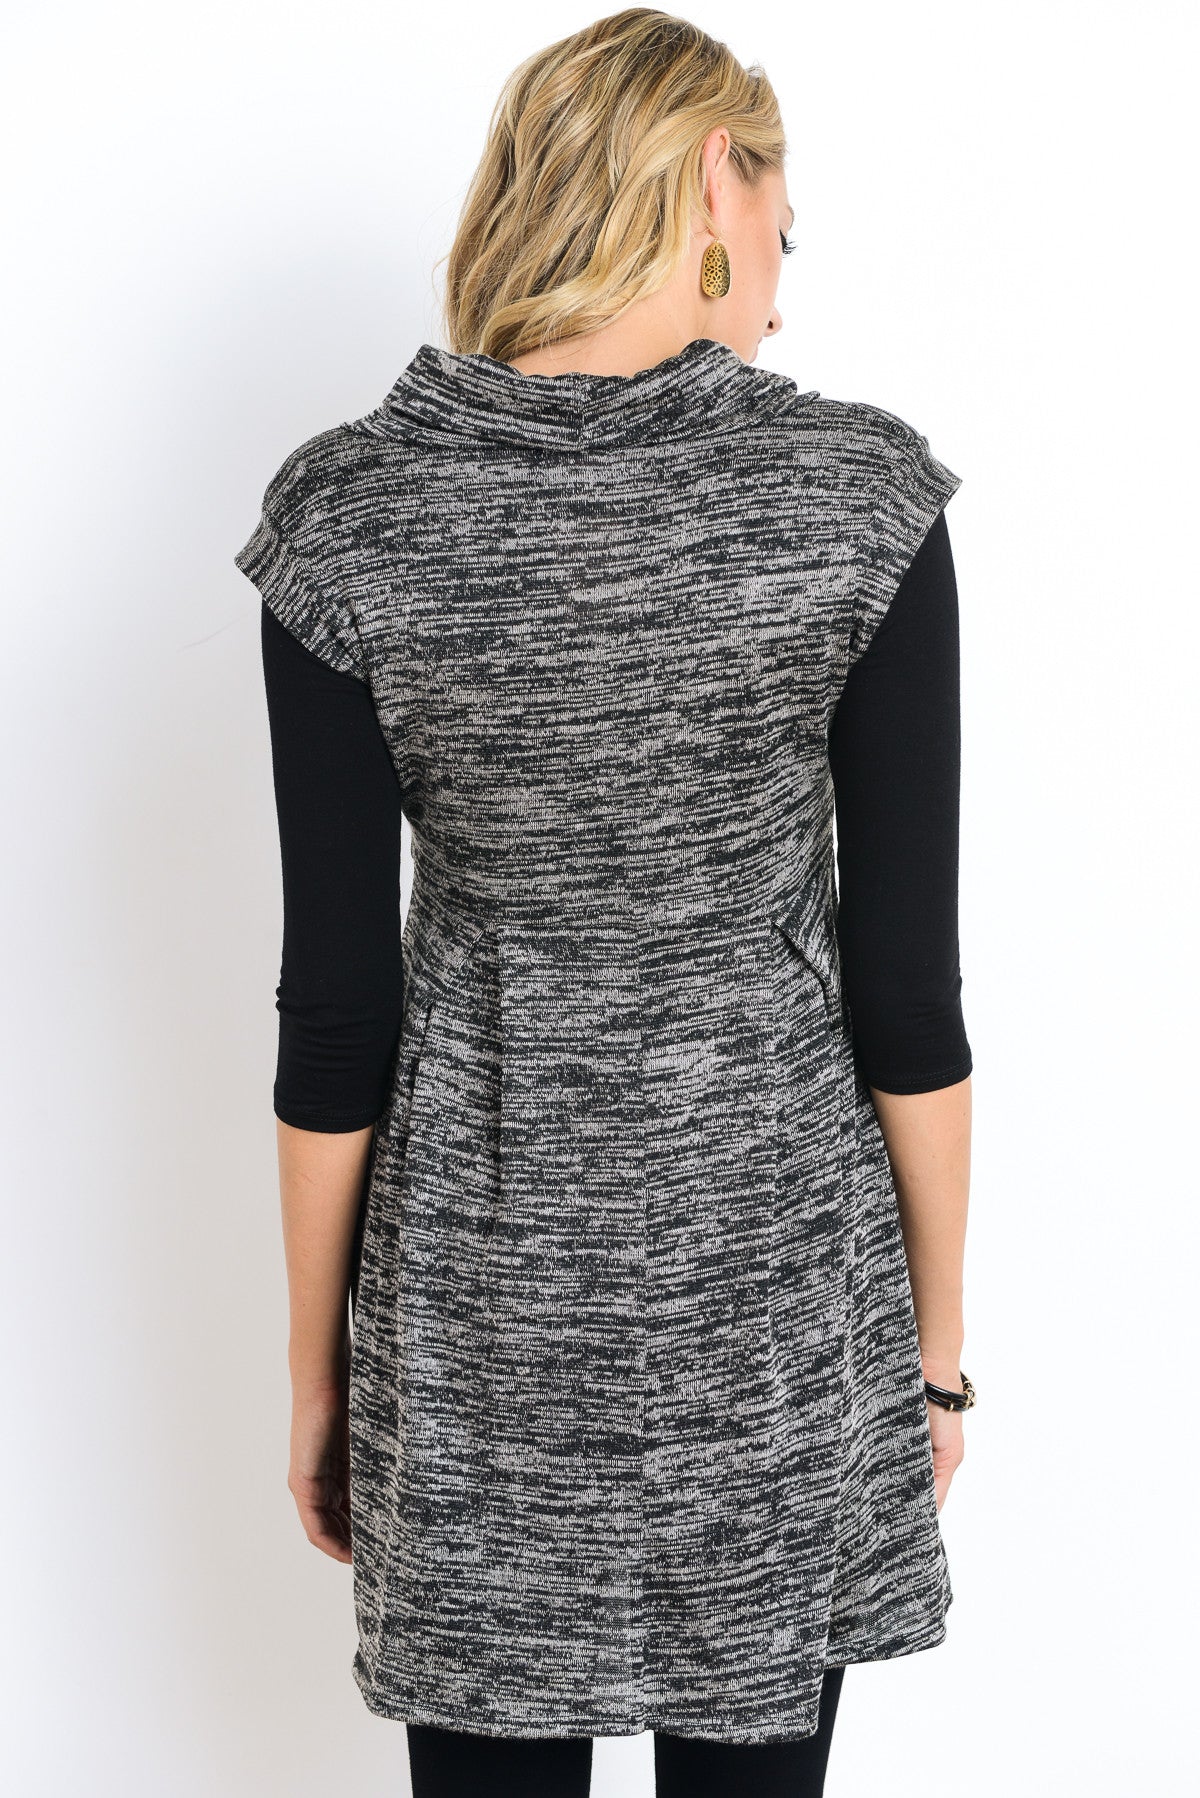 Cowl Neck Maternity Tunic - Mommylicious